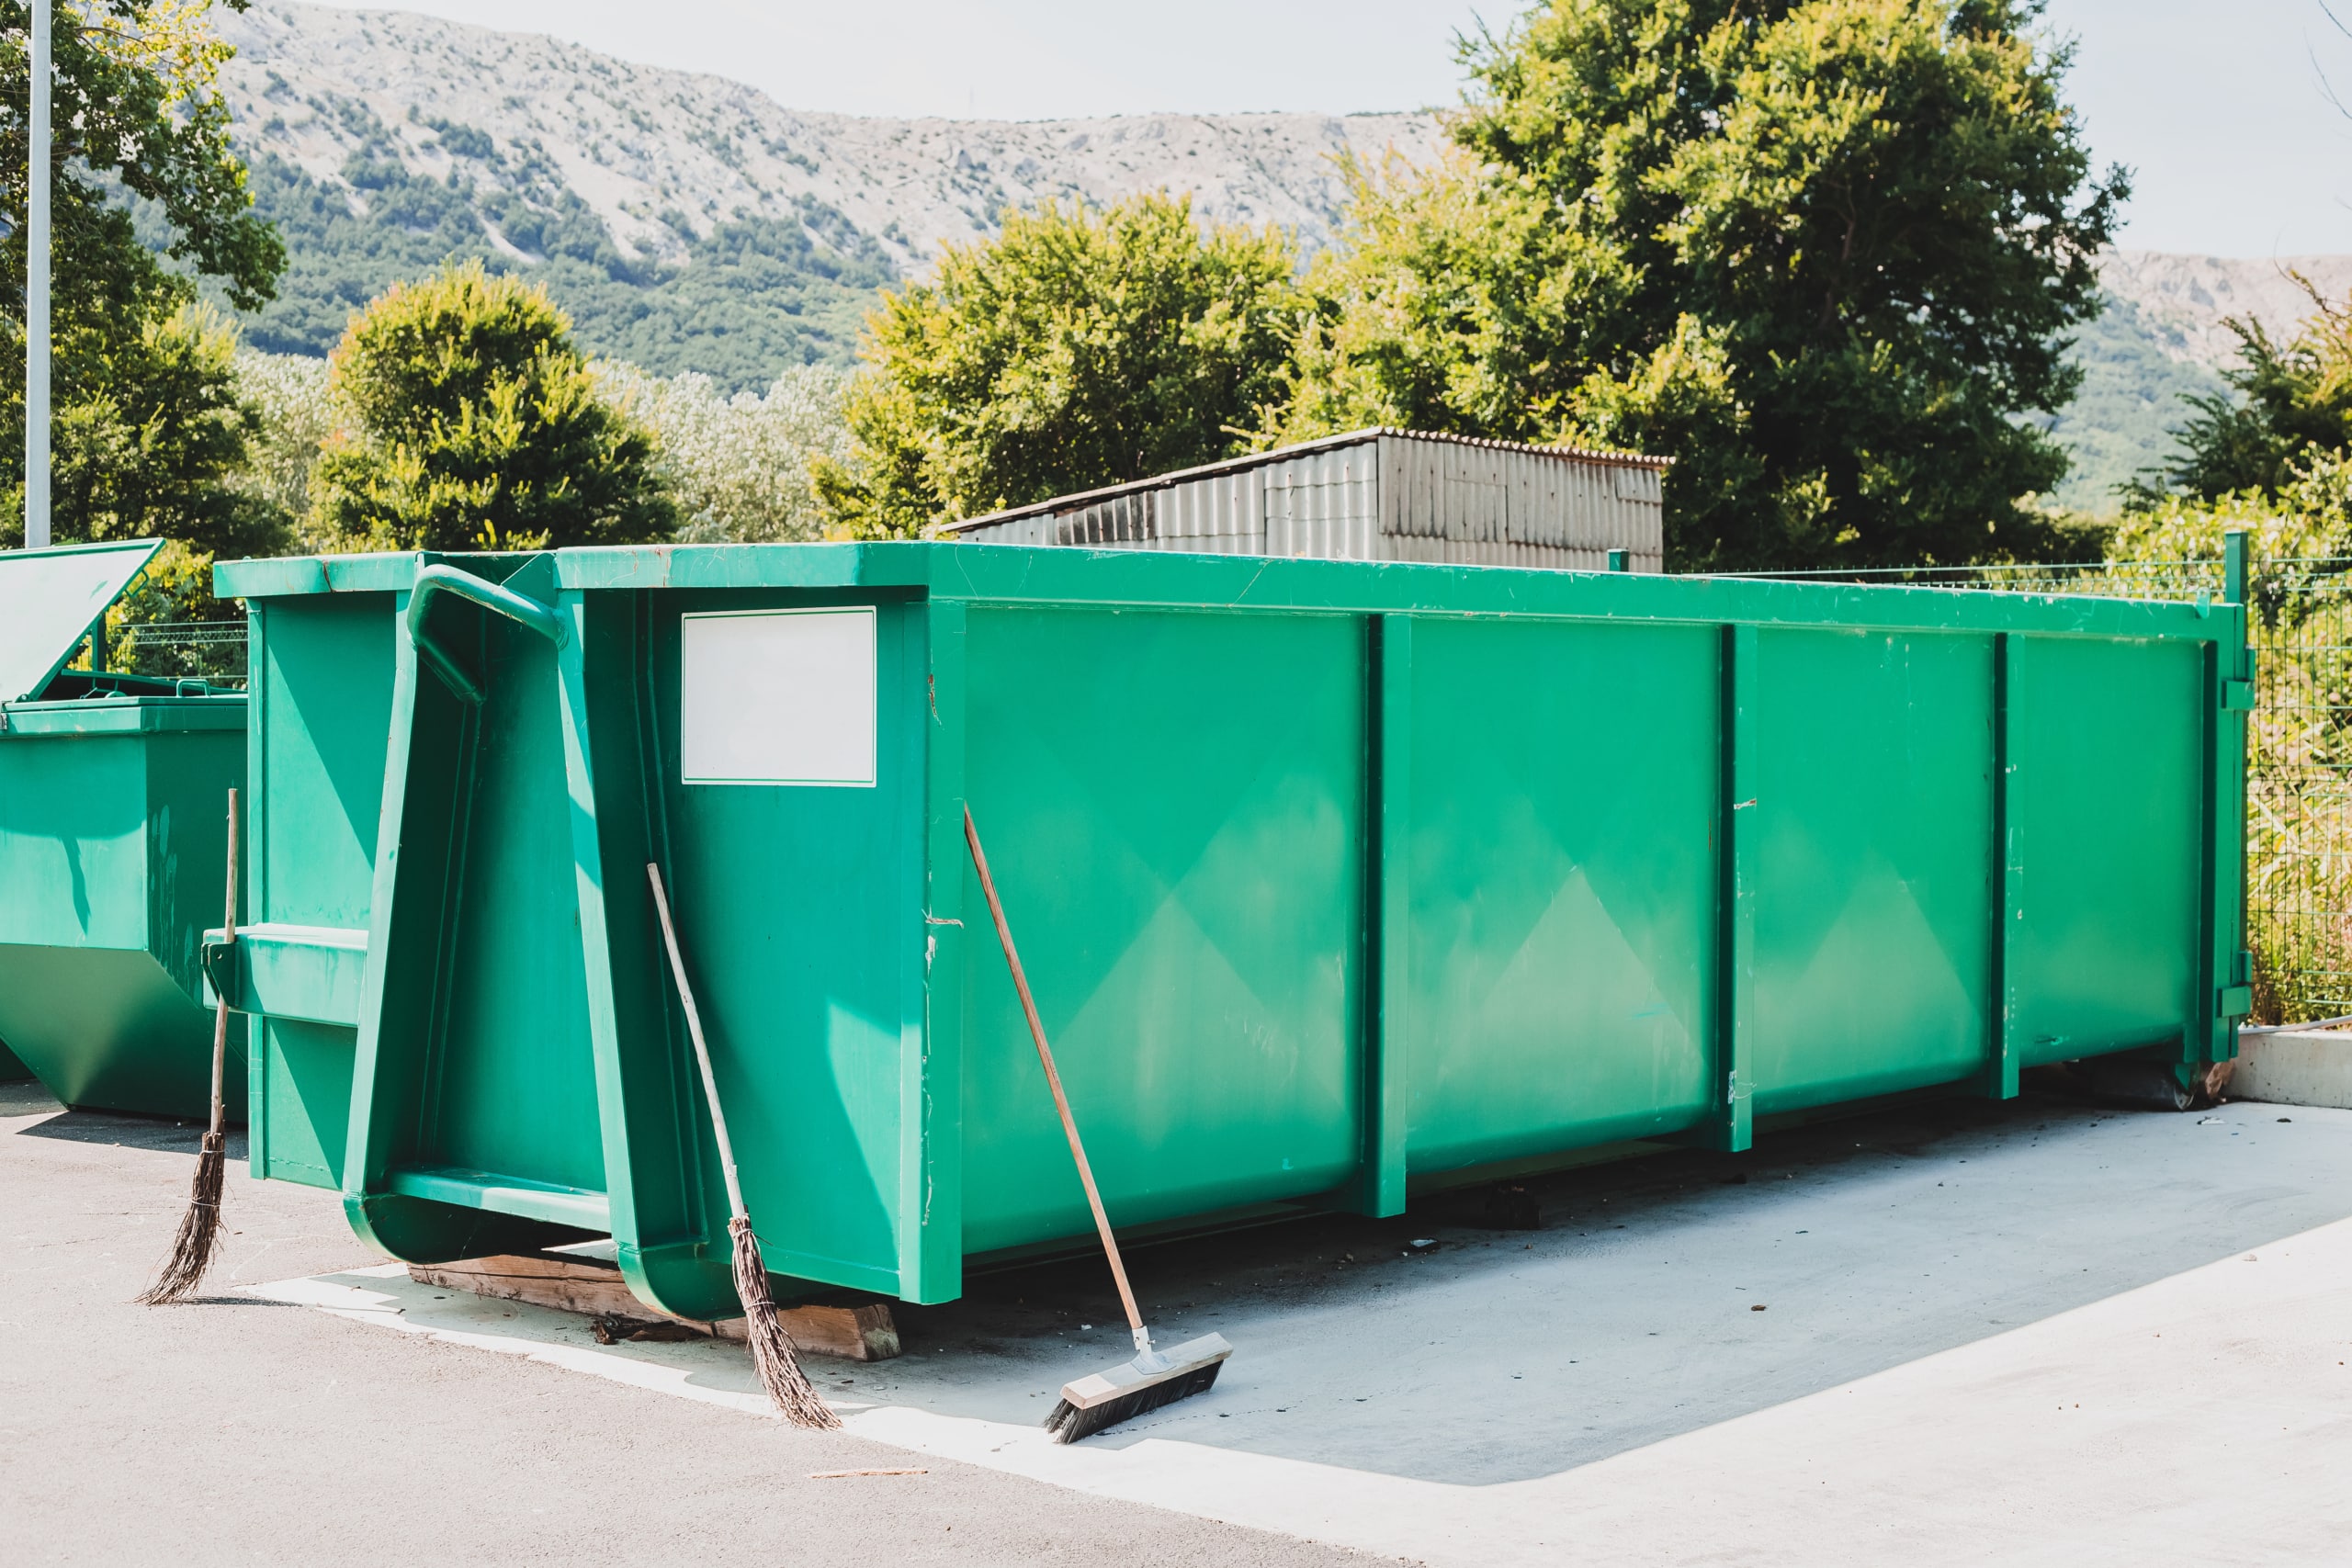 Dumpster Rental Sizes: Which One Is Right for You?